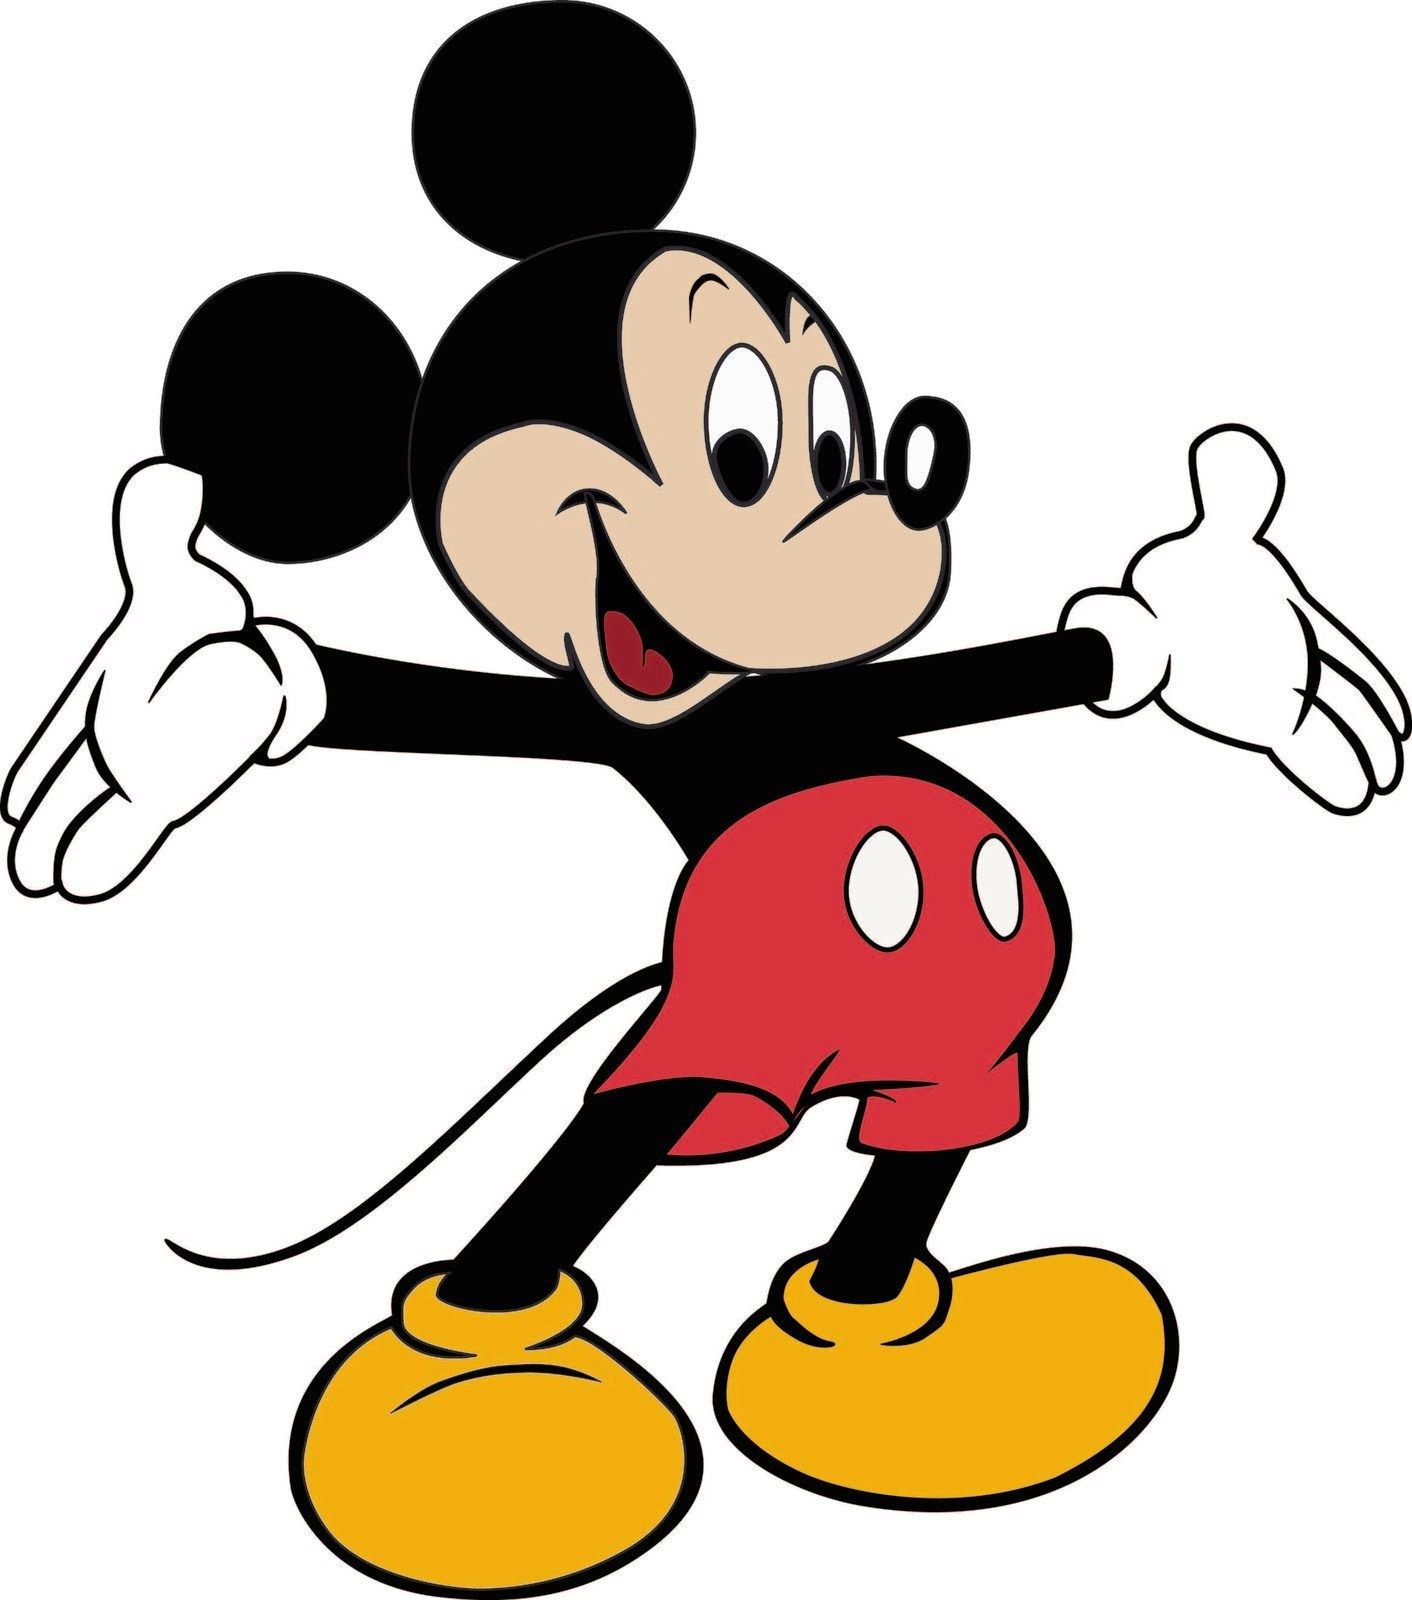 Mickey Mouse Cartoon Wallpapers on WallpaperDog